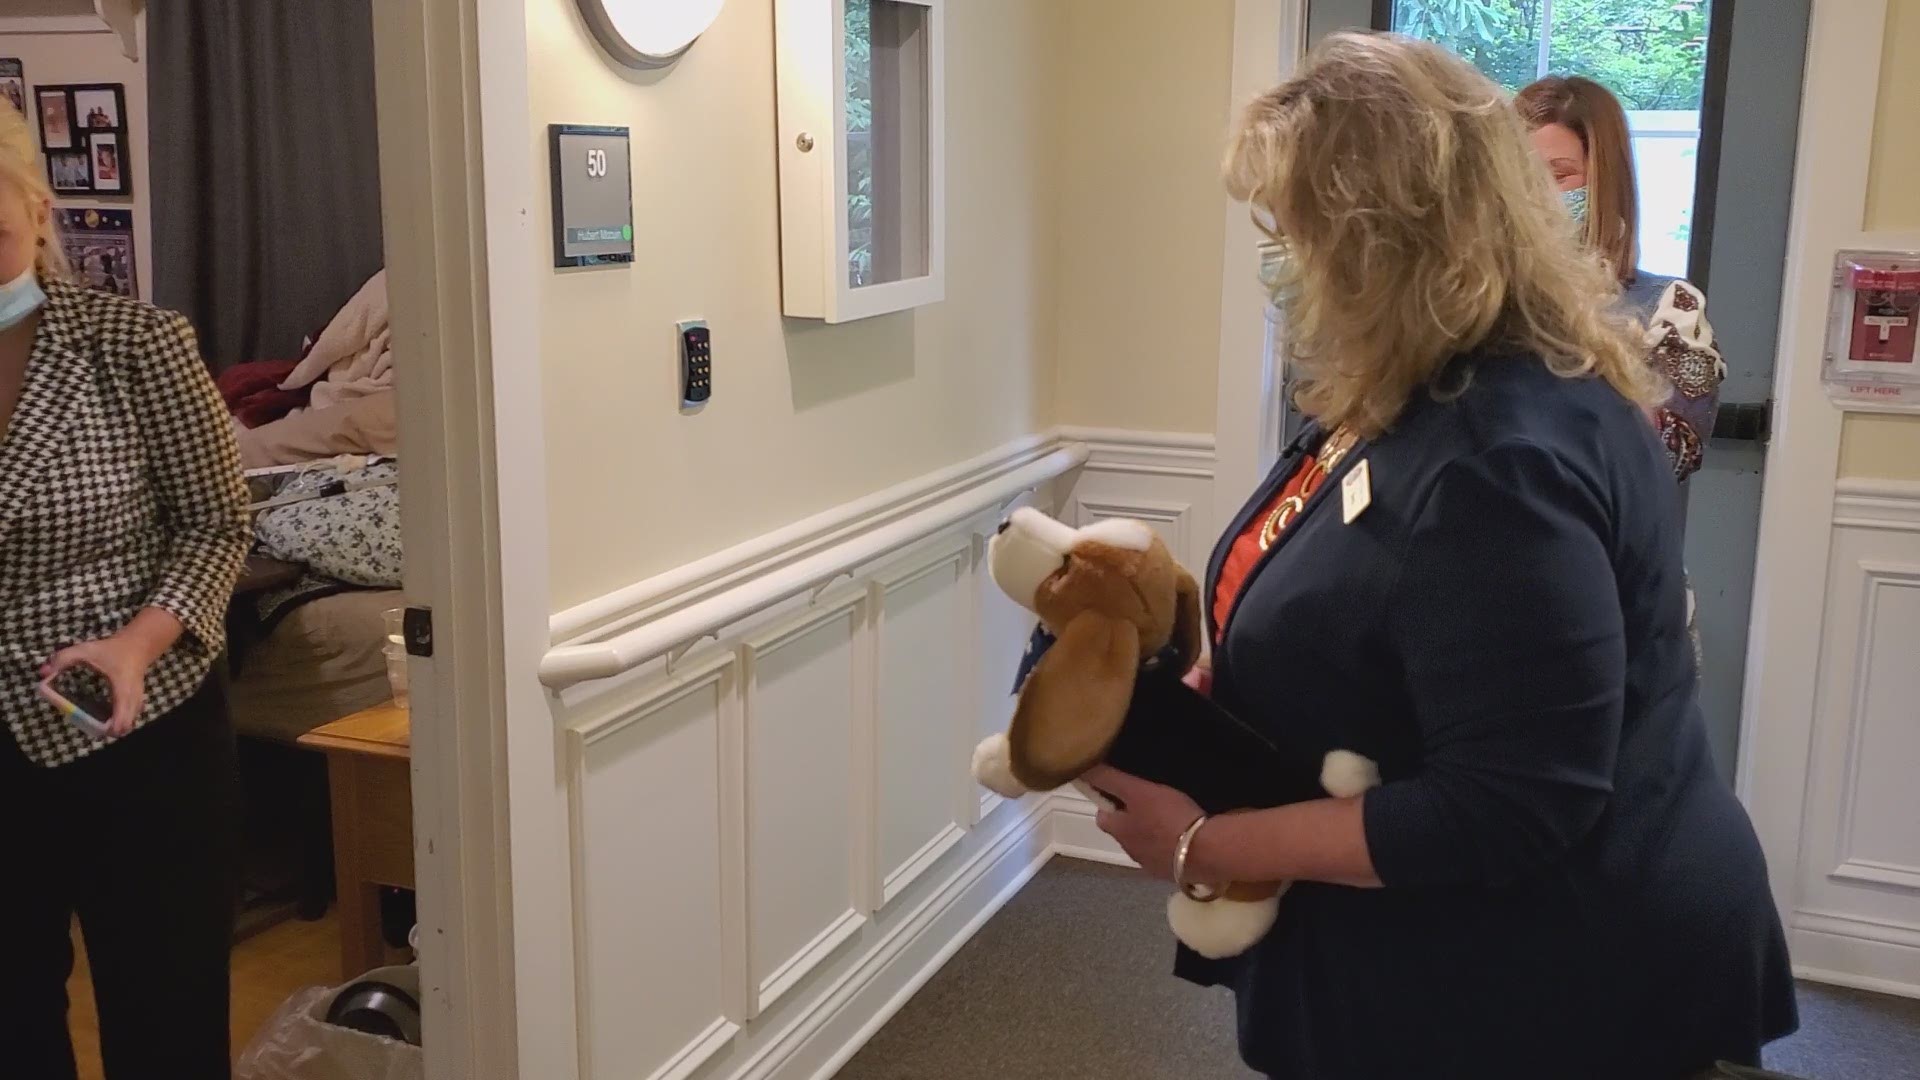 It's an emotional day filled with visits and stuffed puppy dogs for veterans at Park Louisville's Memory Care community. Video Courtesy: Brooke Hasch